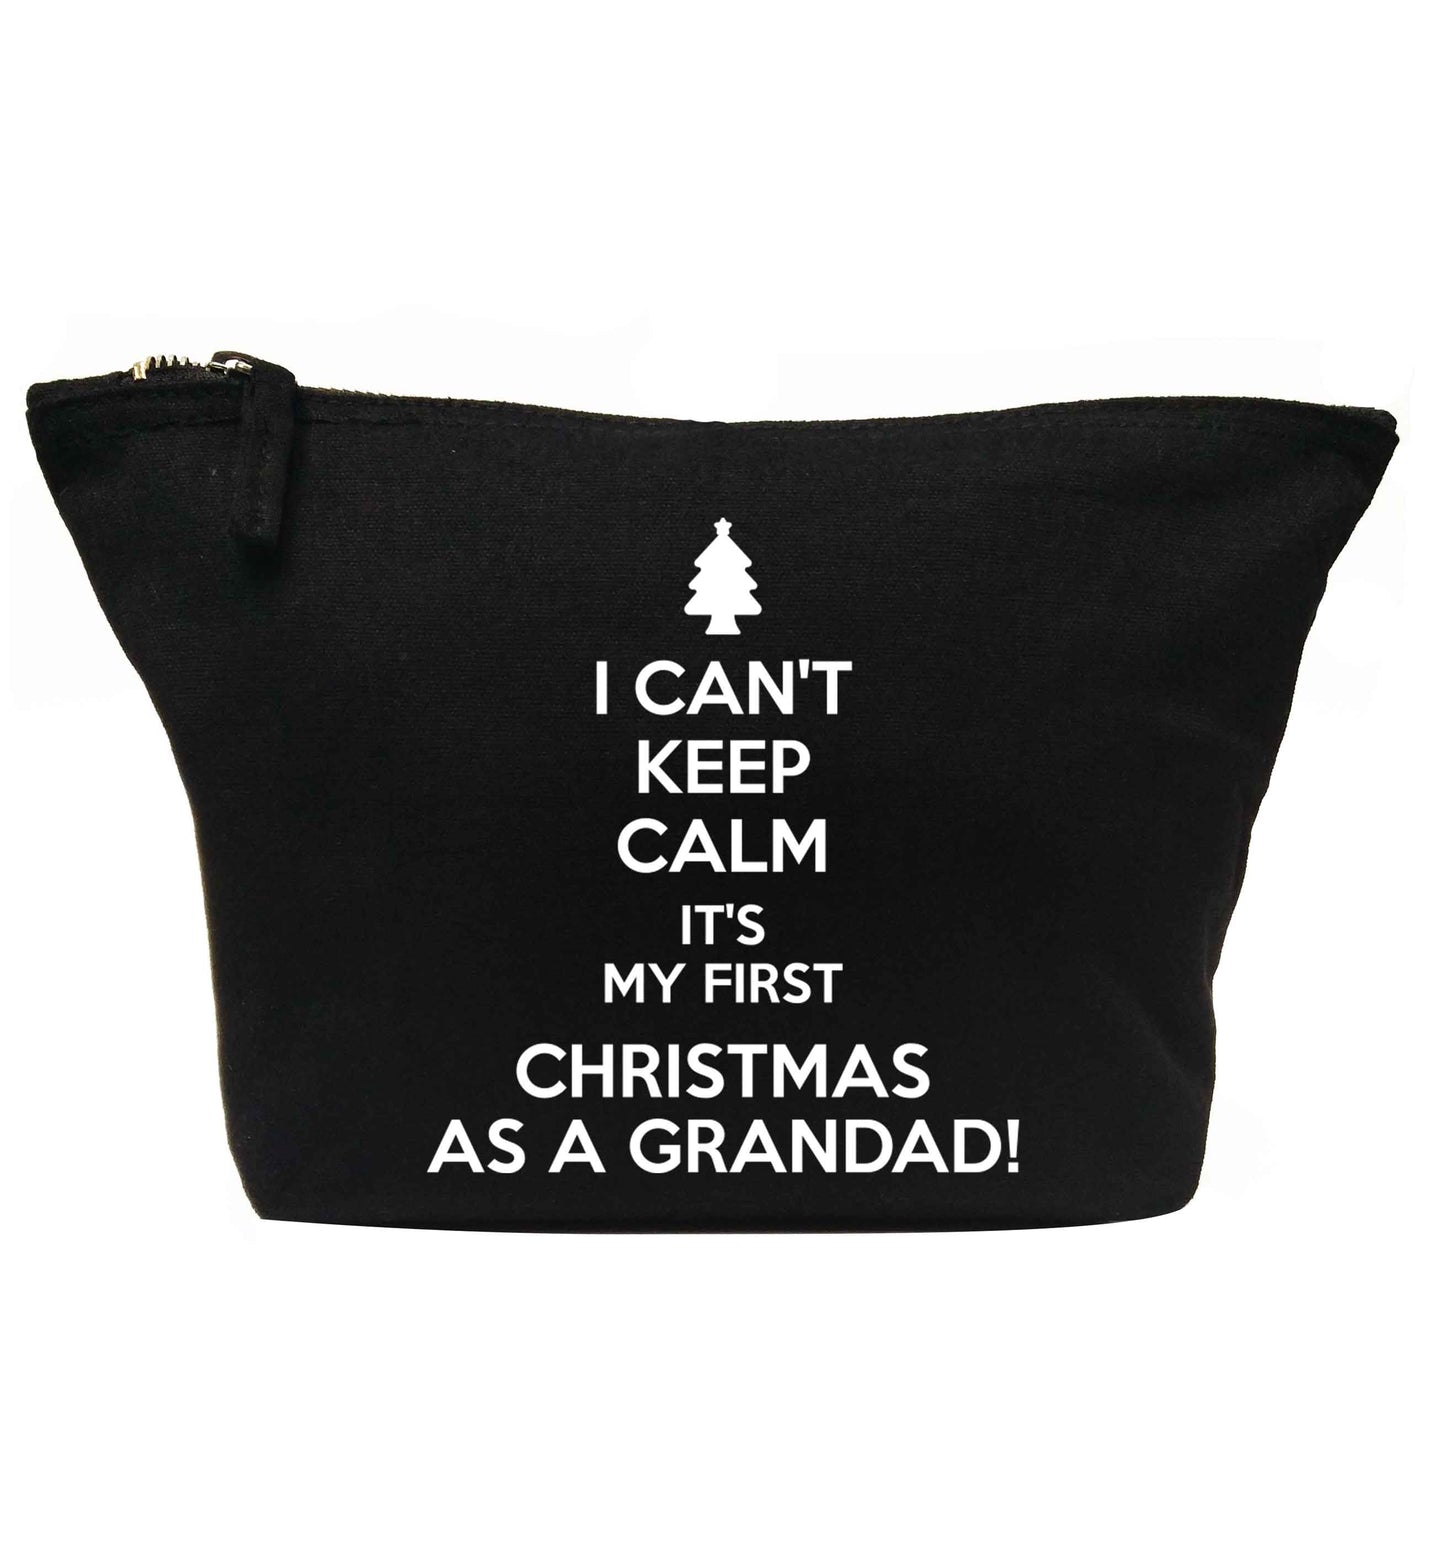 I can't keep calm it's my first Christmas as a grandad! | makeup / wash bag